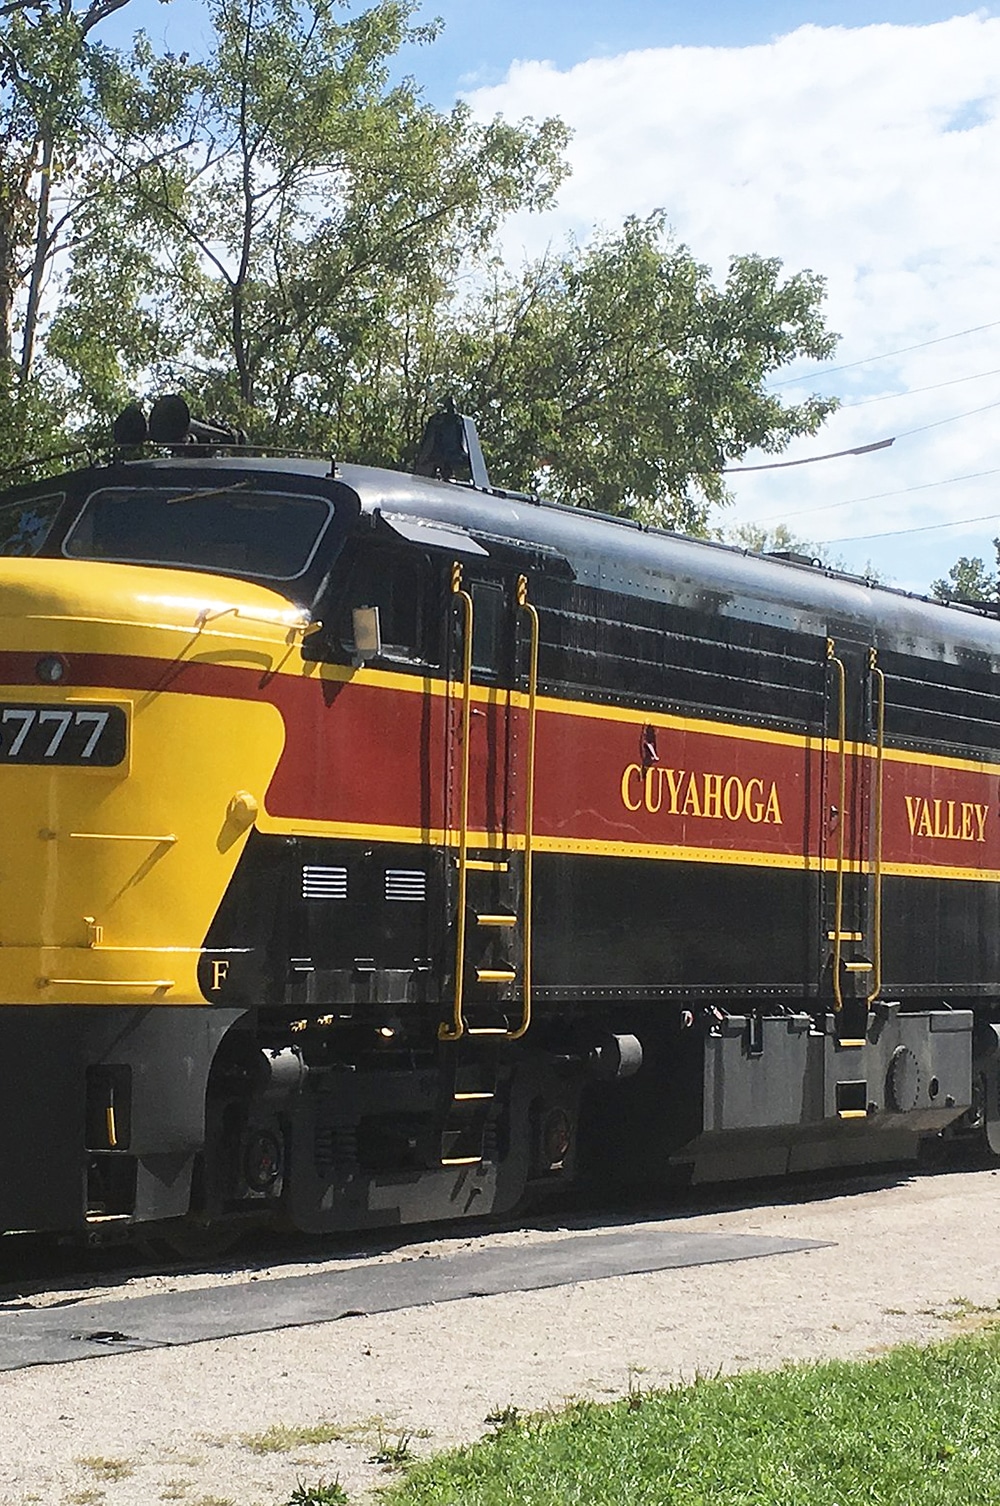 vertical photo of a train with Cuyahoga Valley on the side, and the number 6777 on the front. trees behind and grass in front. Image via Wikimedia Commons